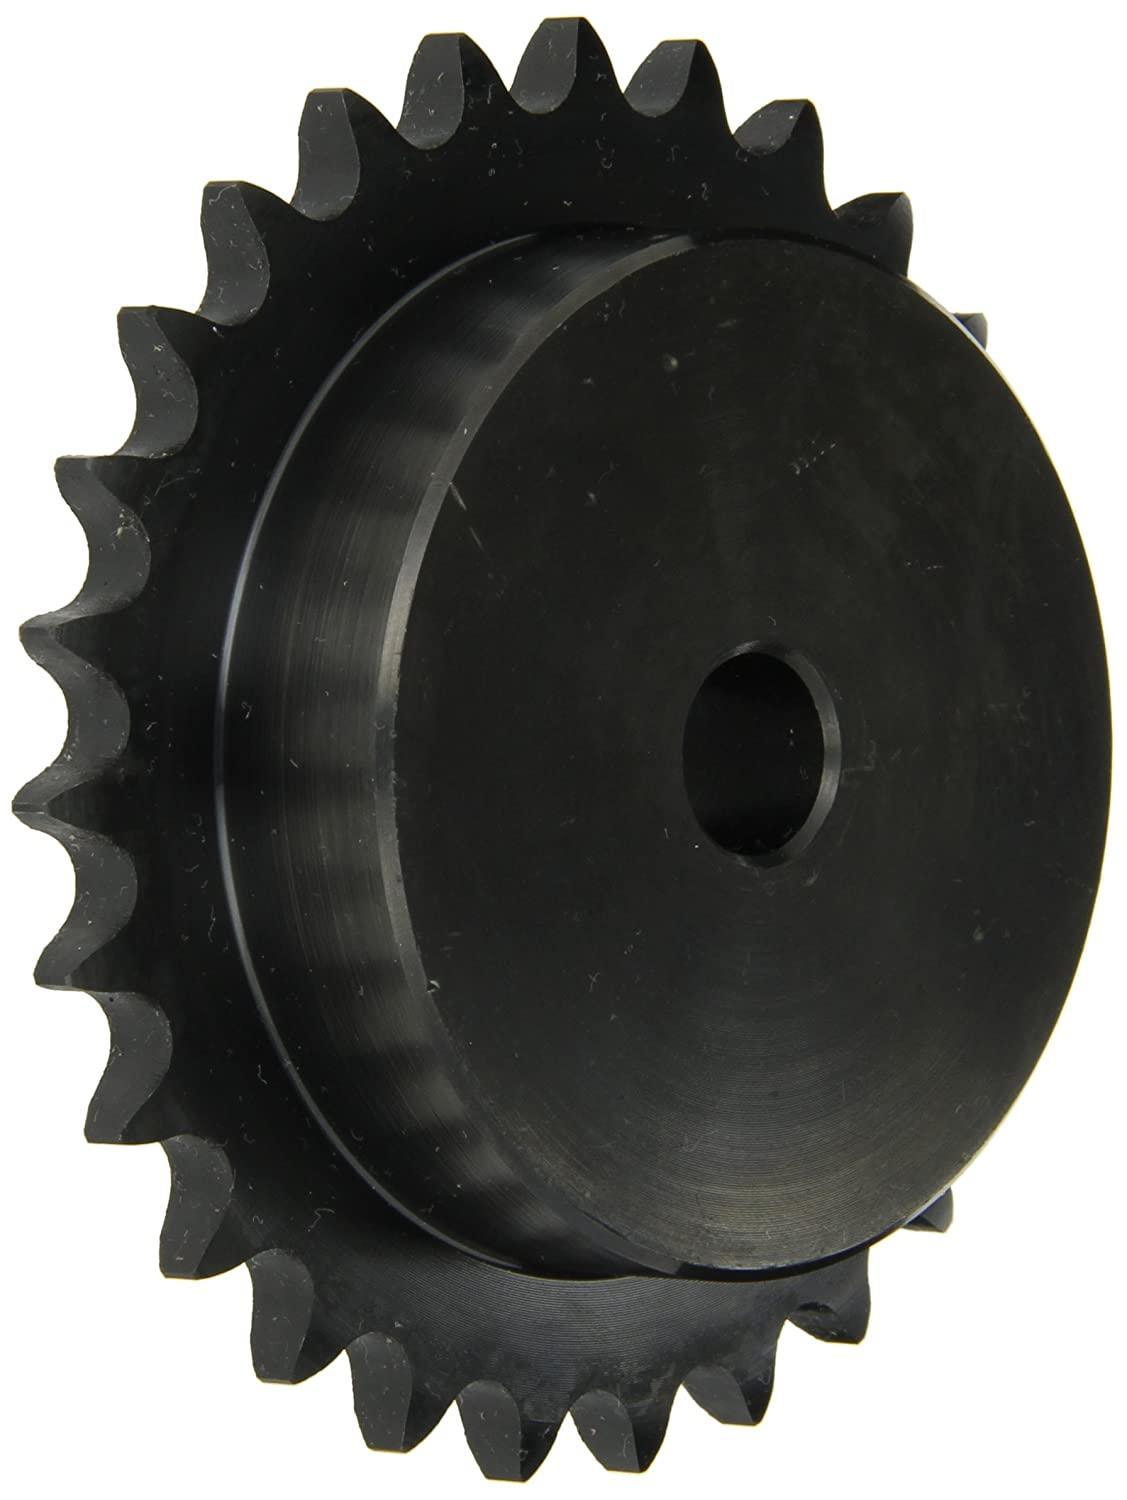 100B30 Roller Chain Sprocket With Stock Bore - Forces Inc